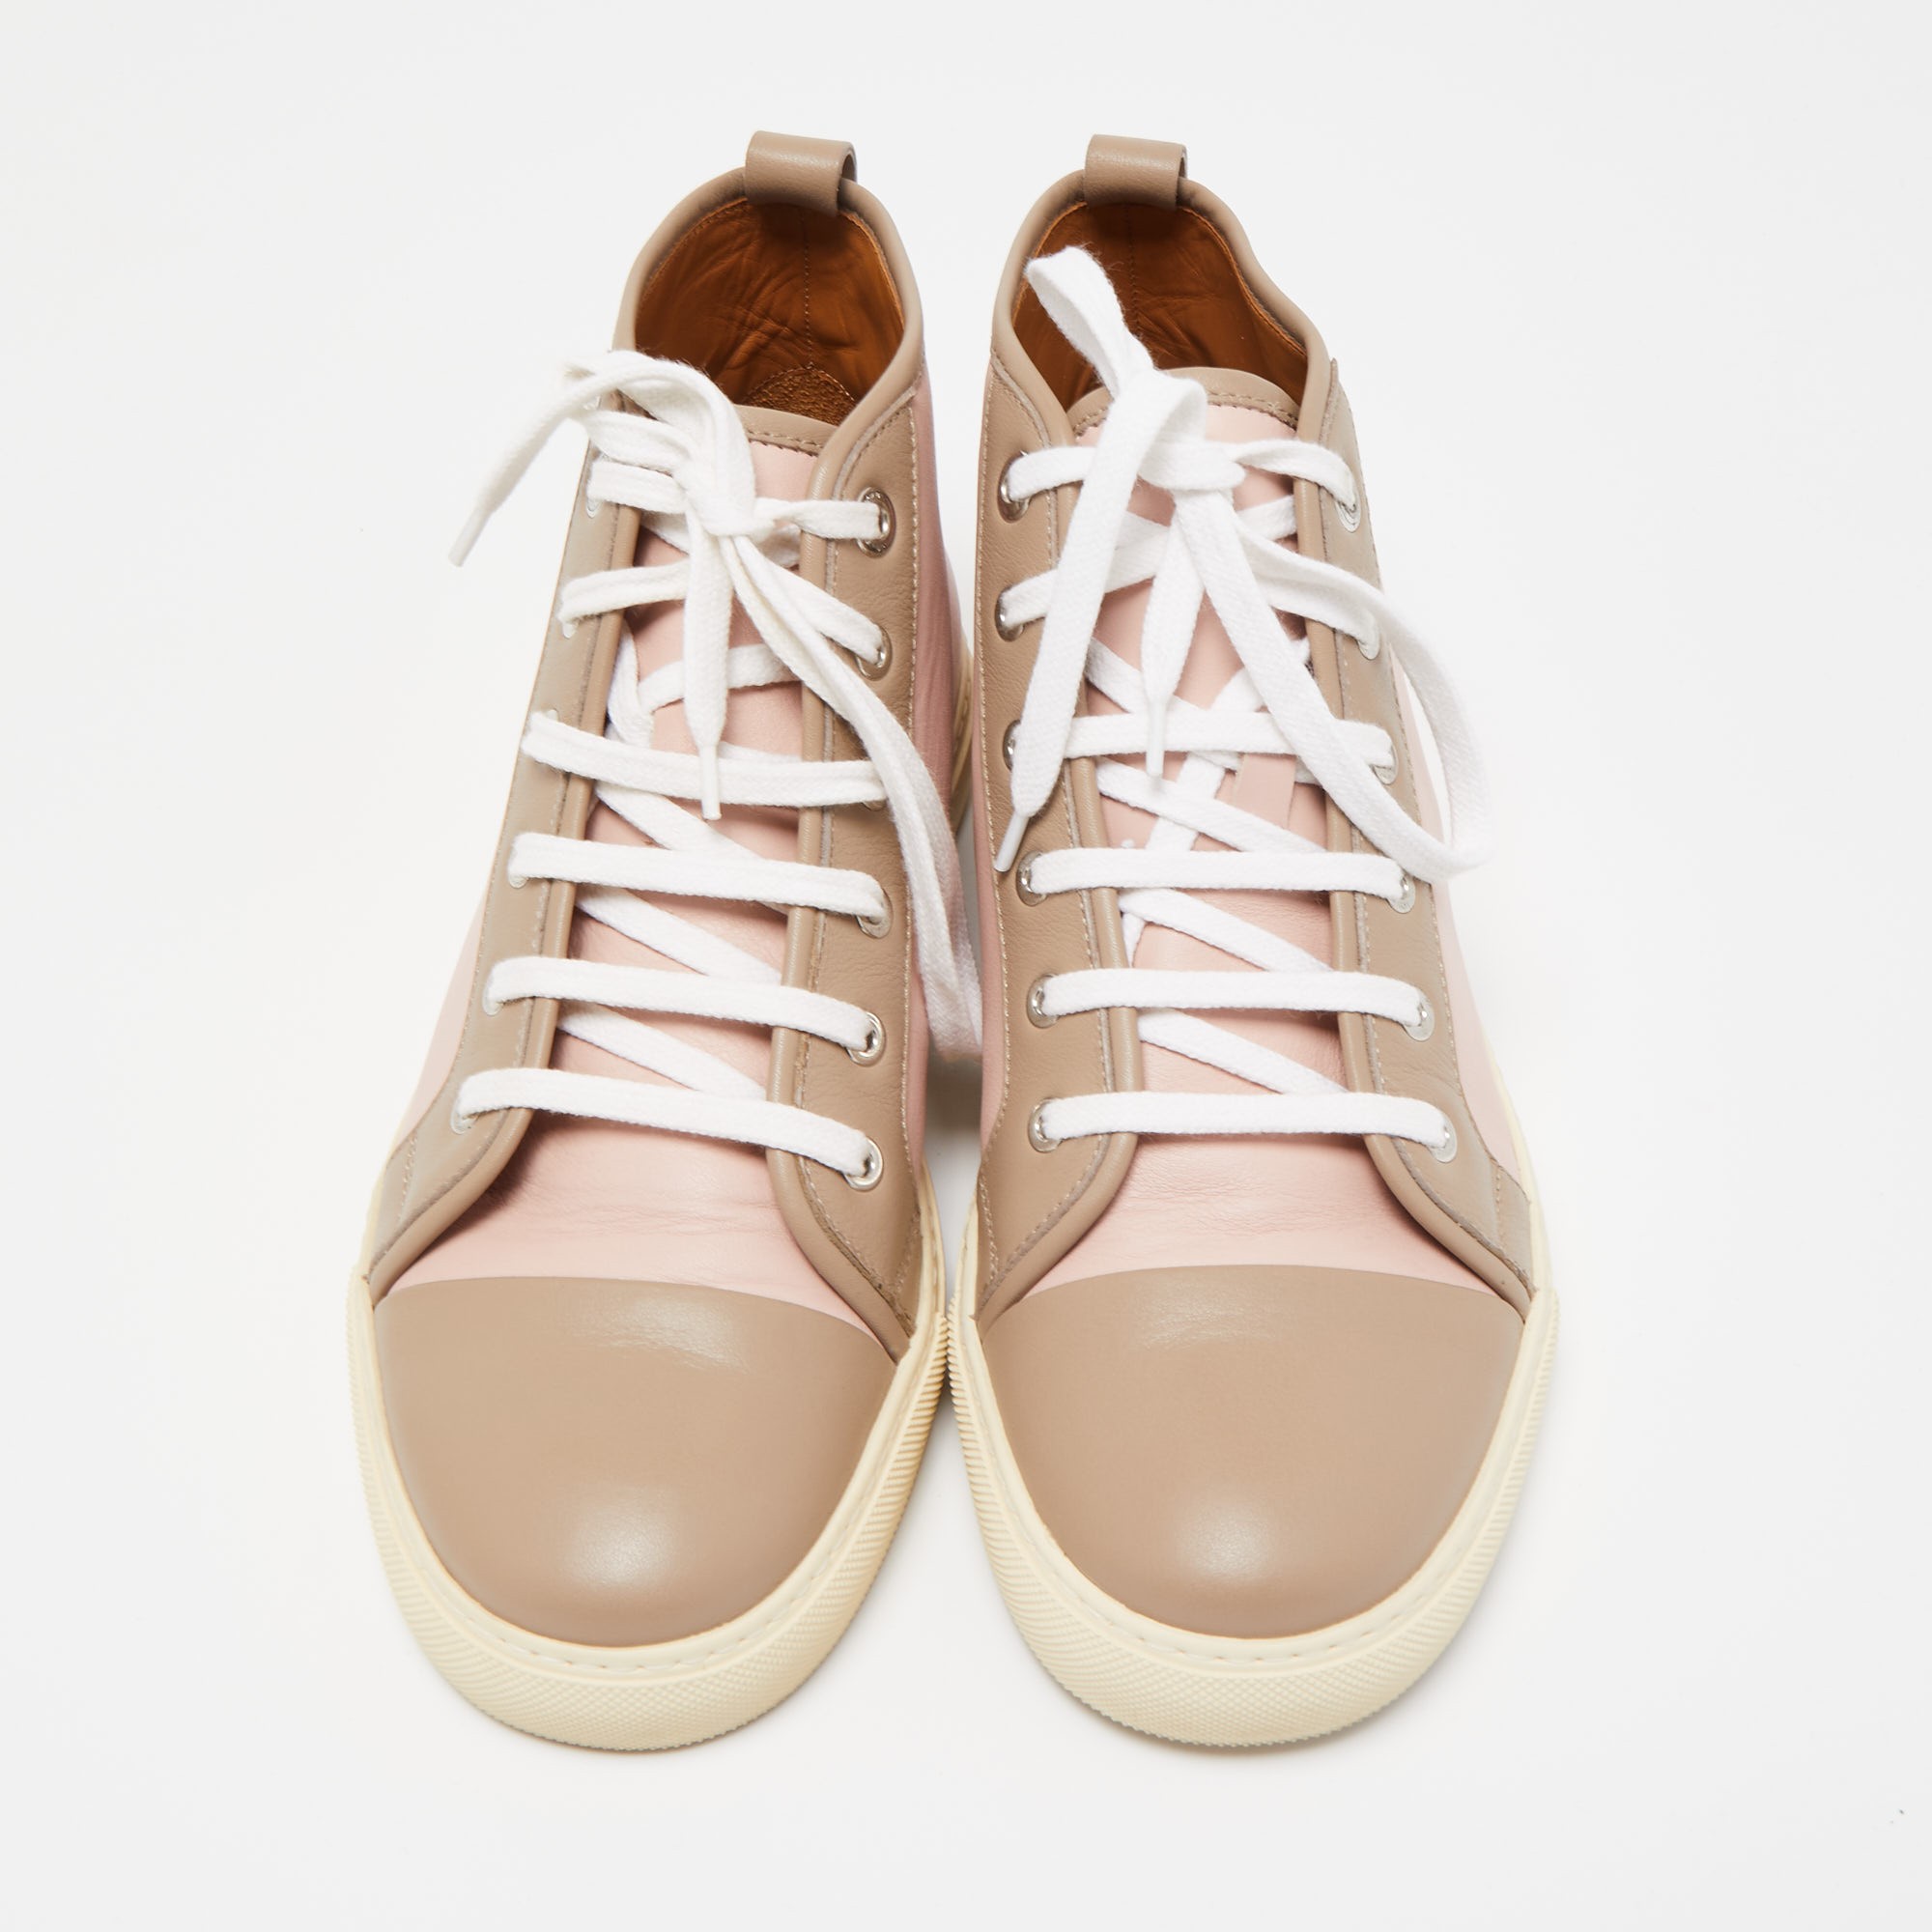 Ralph Lauren Pink/Brown Leather High Top Sneakers Size 40